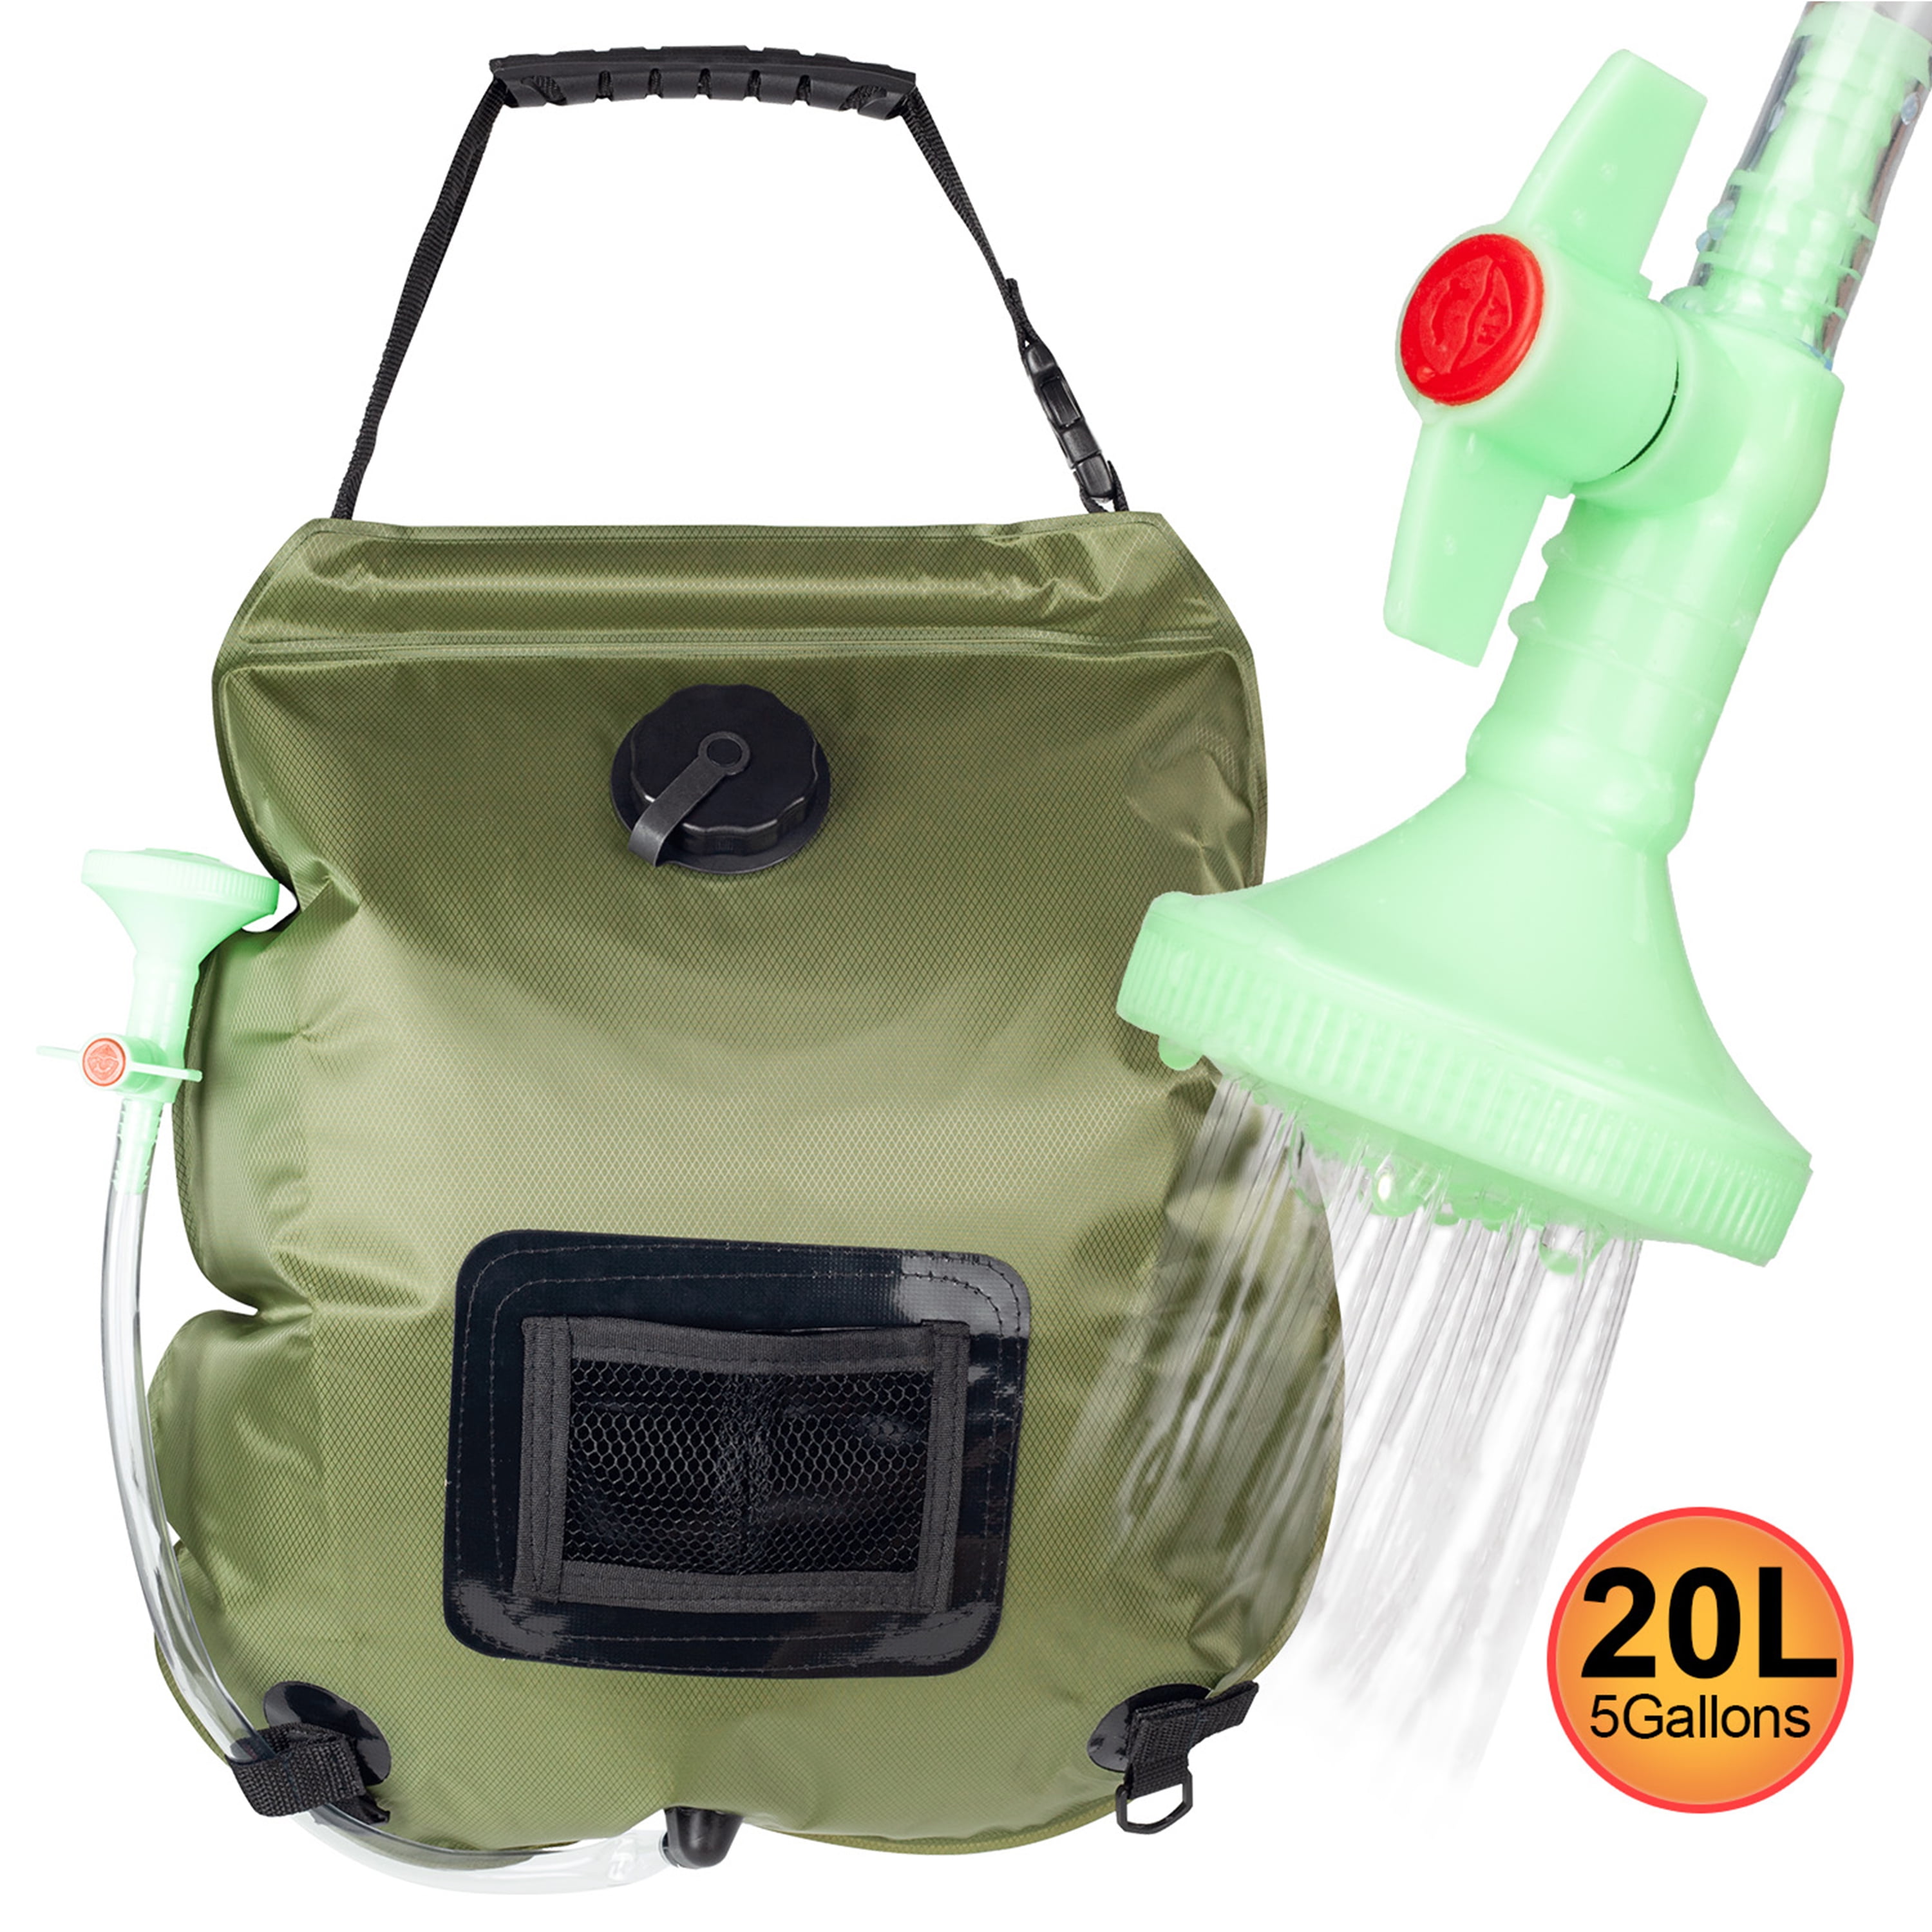 20L SOLAR POWERED SHOWER CAMPING WATER BAG PORTABLE SUN COMPACT HEATED OUTDOOR 